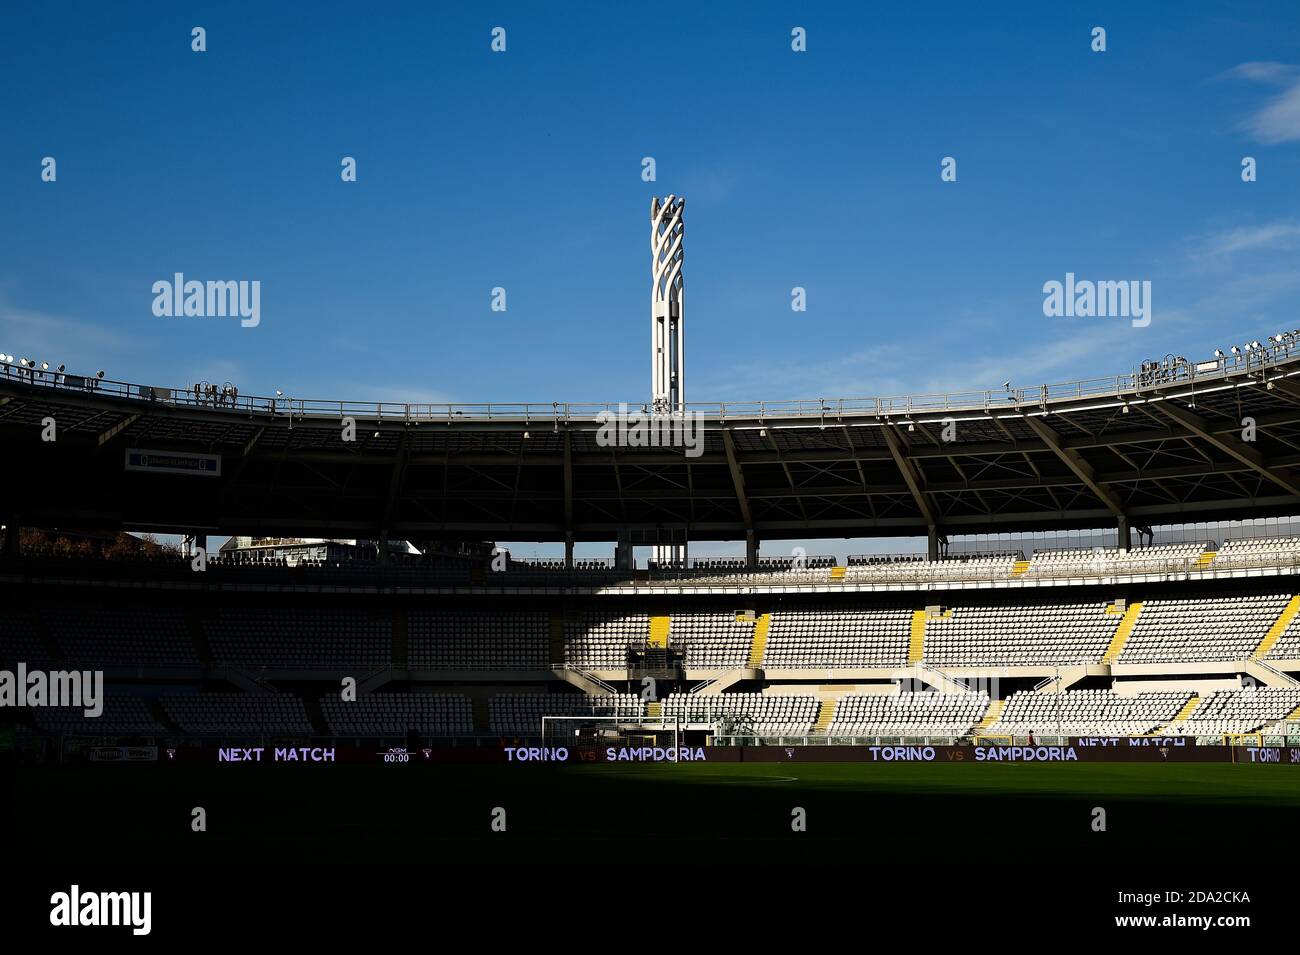 Turin, Italy - 08 November, 2020: General view shows almost empty stadio Olimpico Grande Torino prior to the Serie A football match between Torino FC and FC Crotone. The match ended 0-0 tie. Credit: Nicolò Campo/Alamy Live News Stock Photo